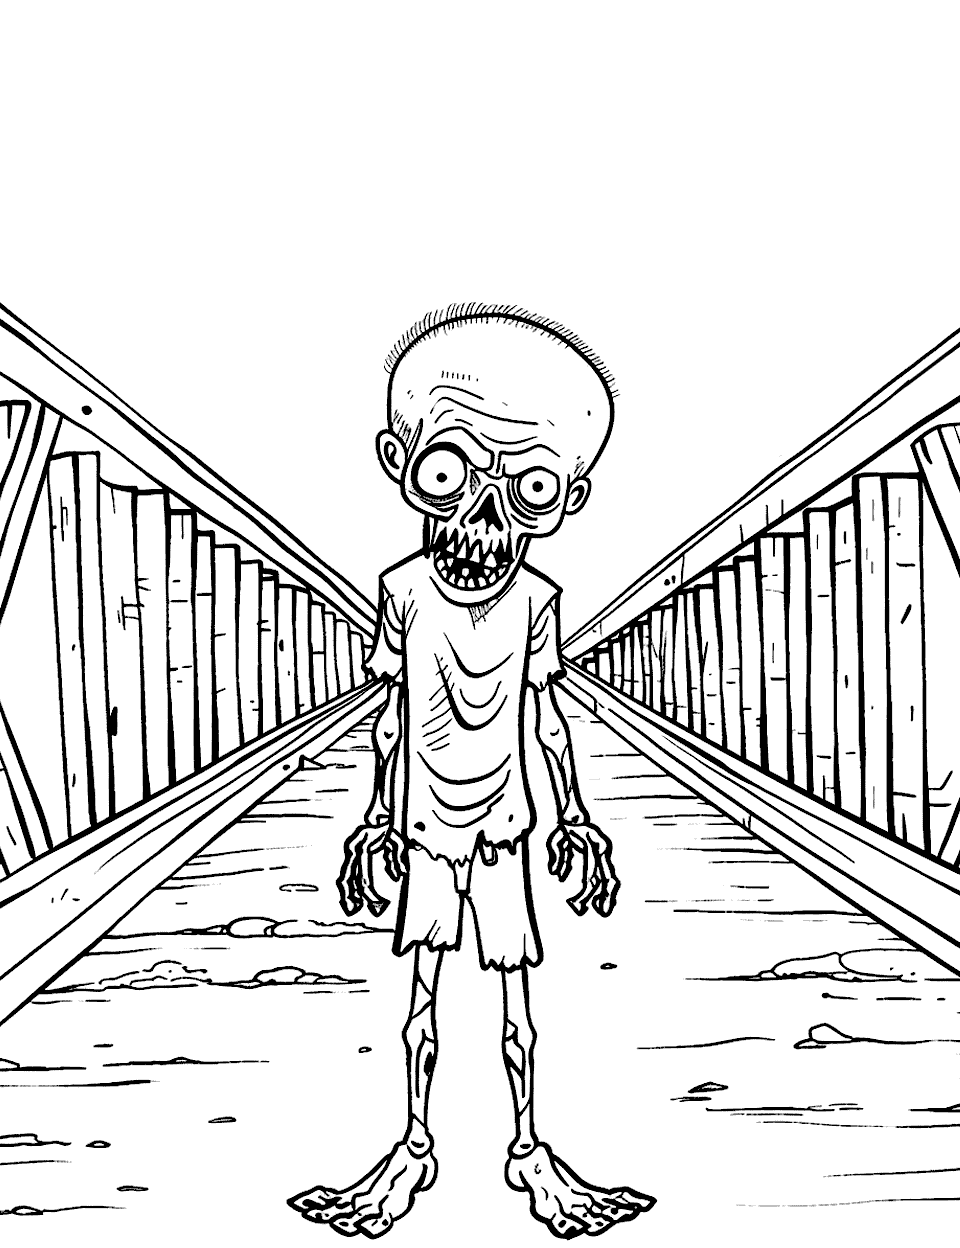 Isolated Zombie on a Bridge Coloring Page - A single zombie standing in the middle of an empty bridge.